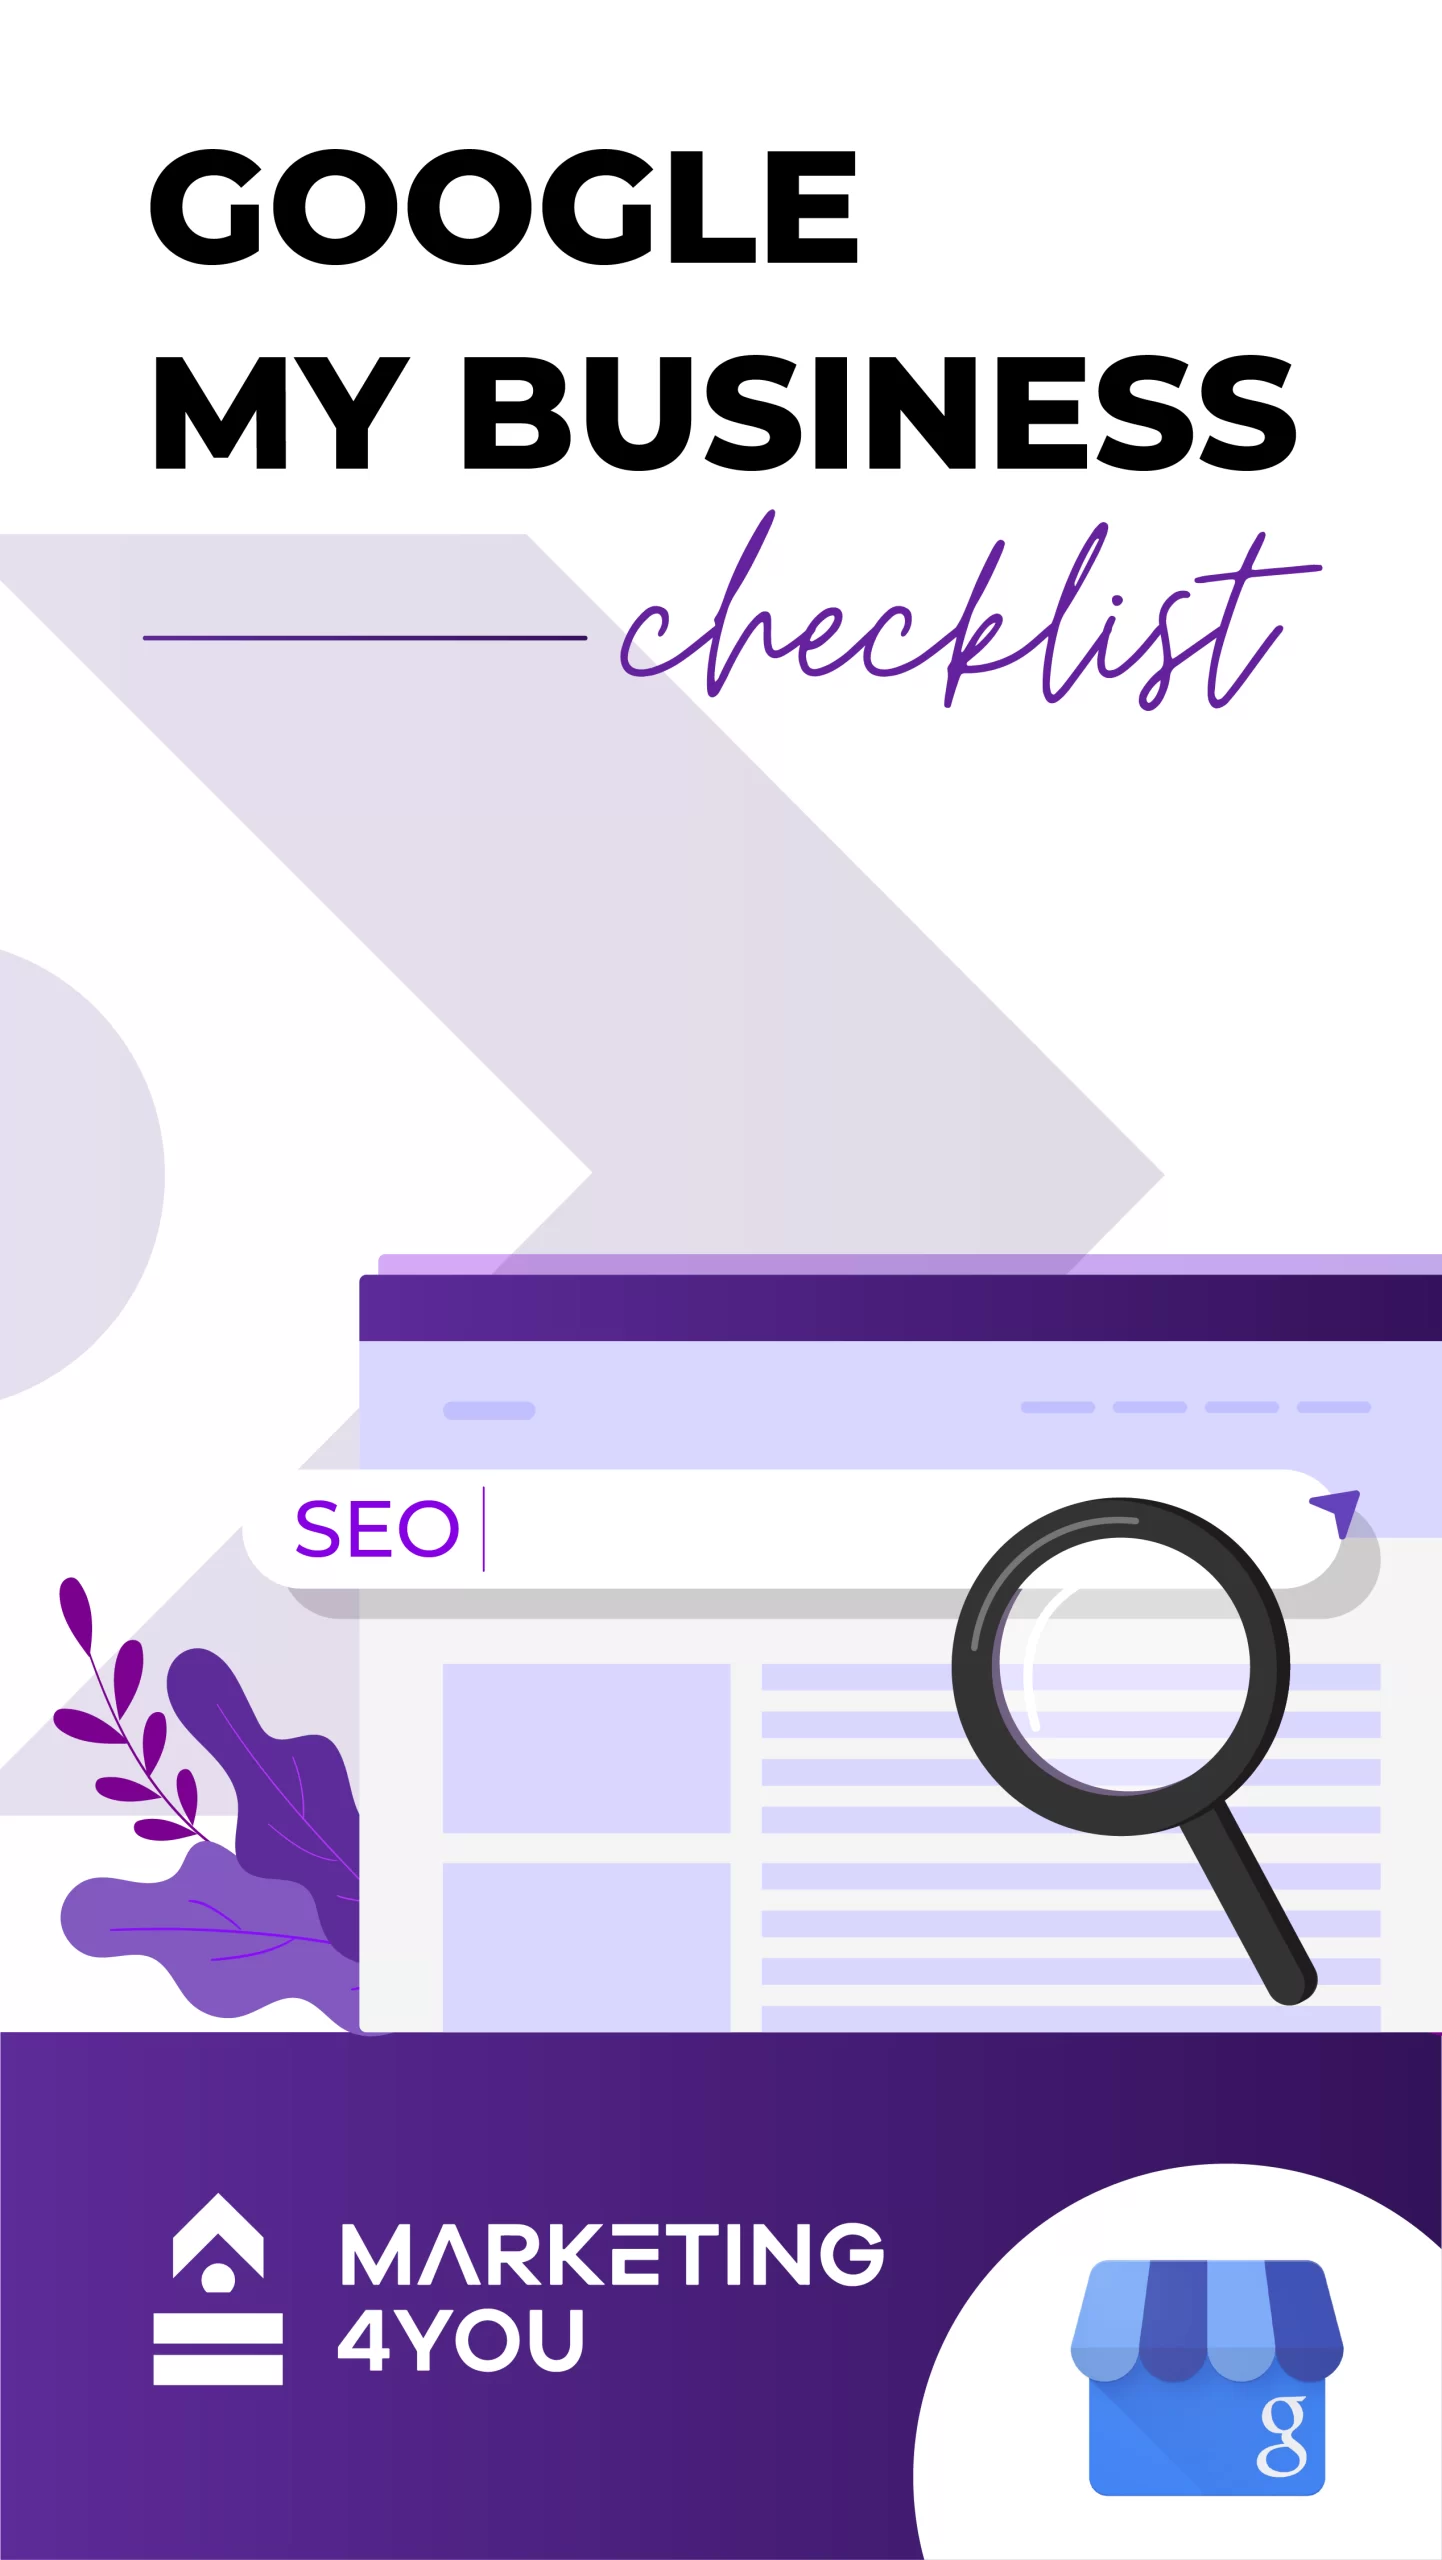 Google Business Profile checklist for an optimised presence on local search